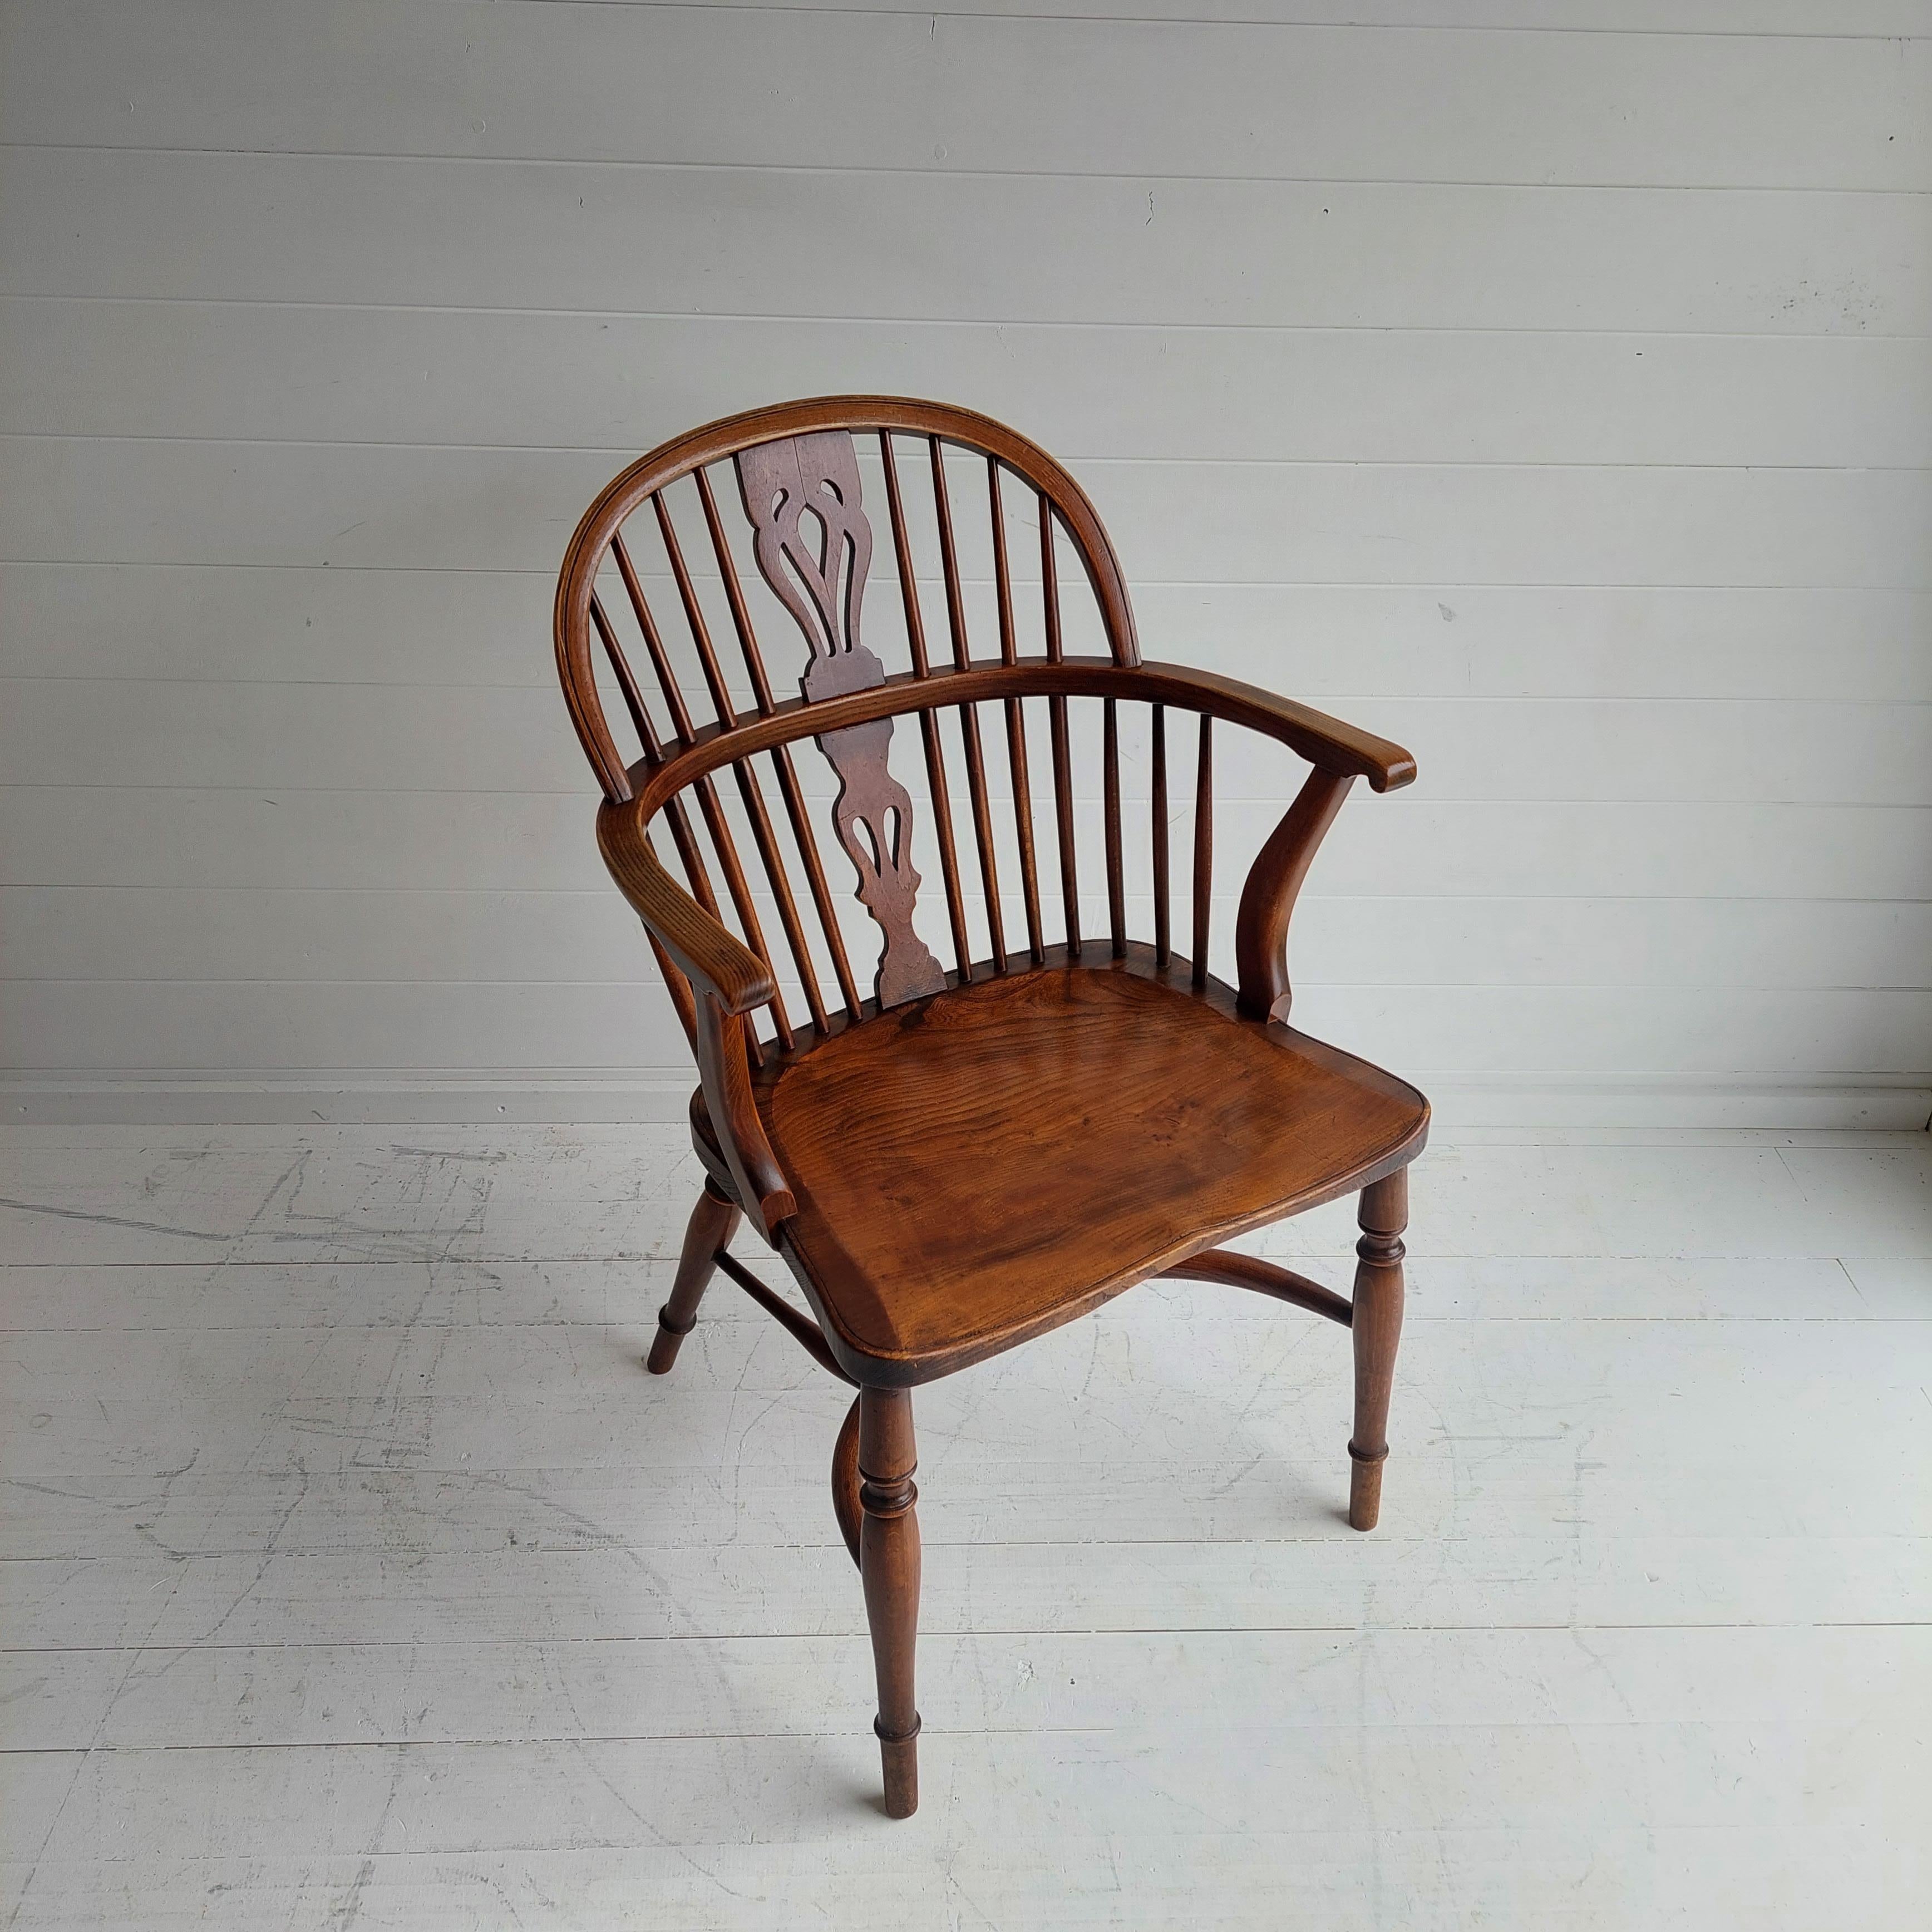 Very attractive elm windsor chair
A magnificent early 20th Century oak and Elm wood double spindle winsdor armchair.
The shaped seat raised on turned splayed legs united by a cow horn stretchers and featuring a splat in the backrest.
England,